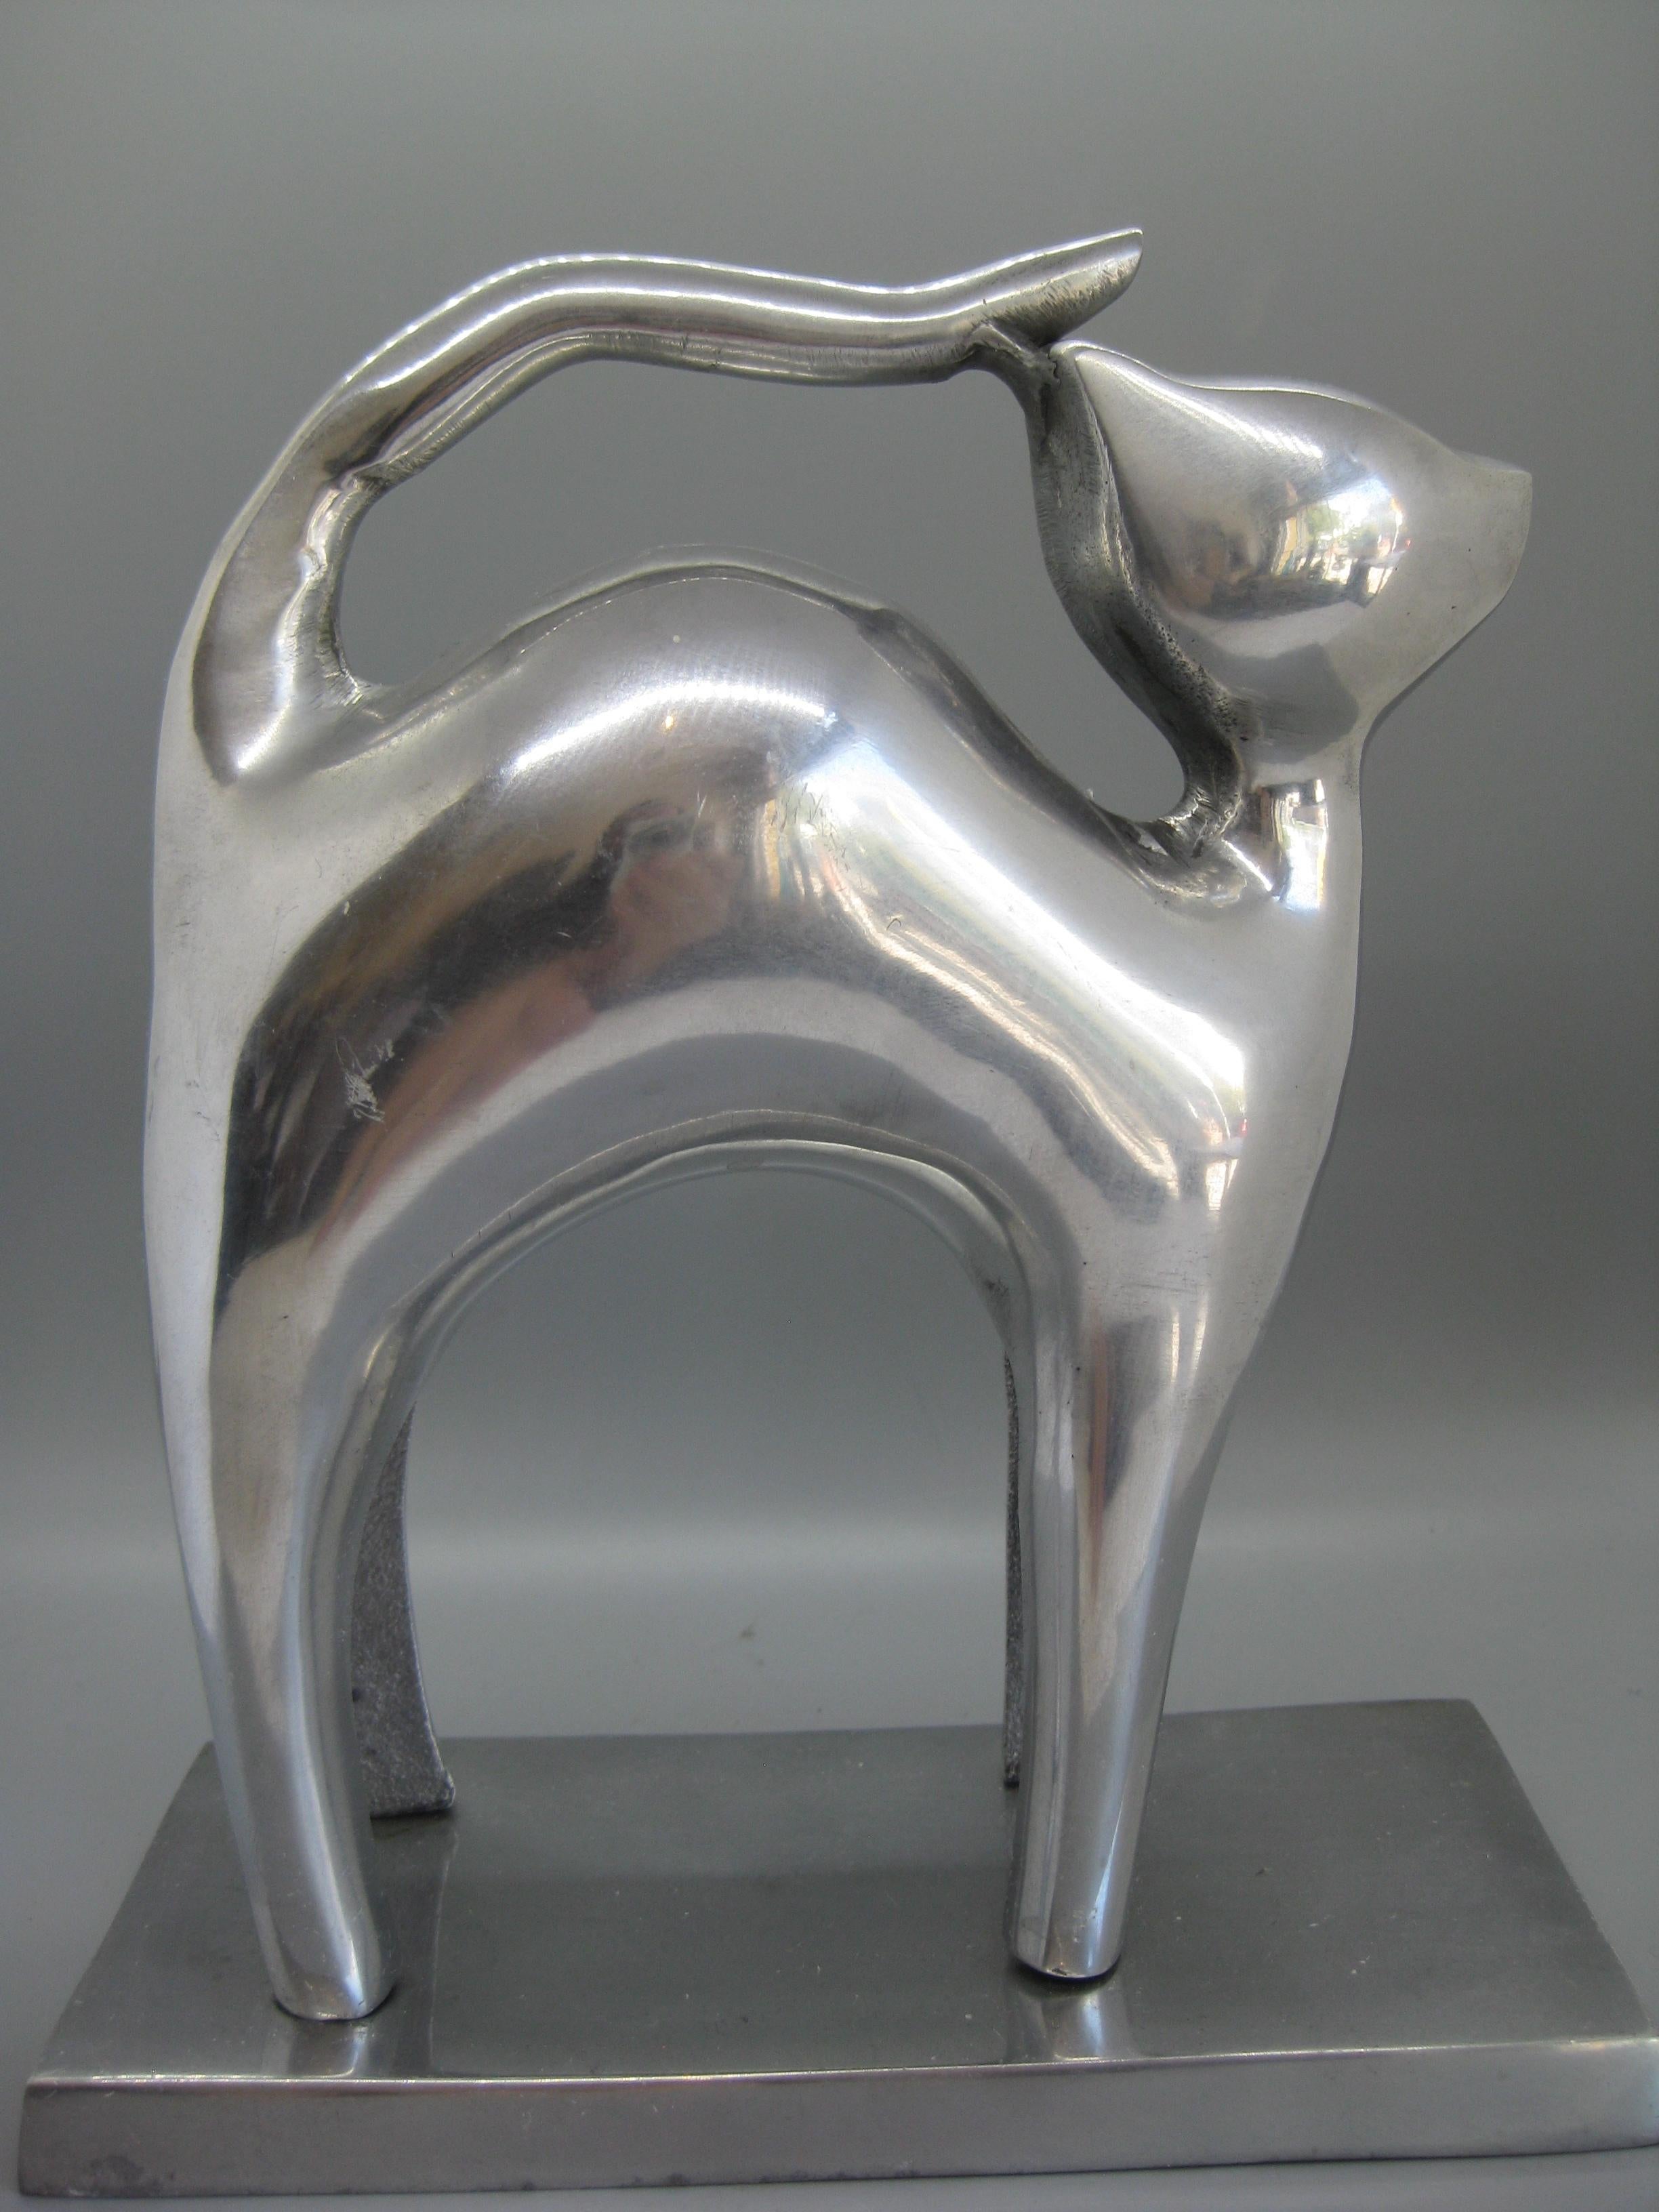 Wonderful modernist cast aluminum cat sculpture. No artist signatures or marks. Great form and design. Has a nice patina and can be polished if desired. Wobbles a little when on a flat surface. In overall very nice condition. Measures: approximate 8